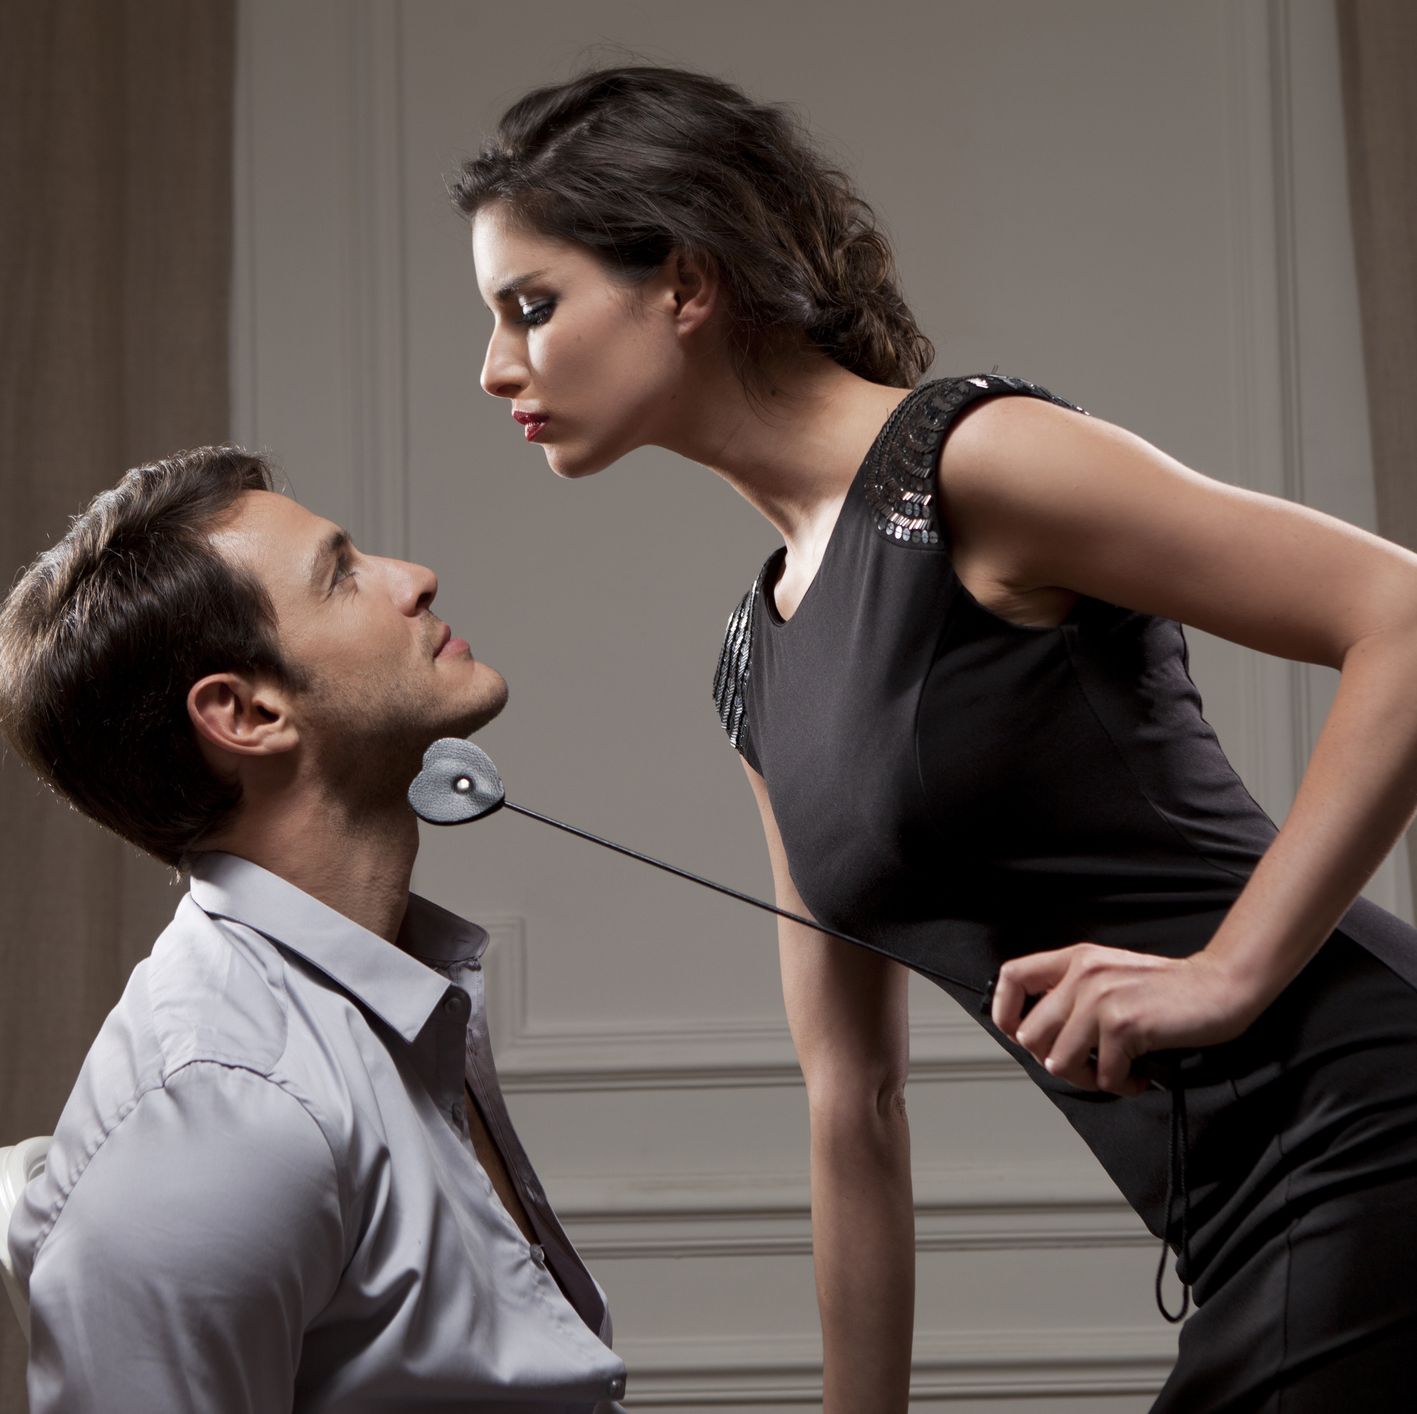 young woman dominating a man with a whip